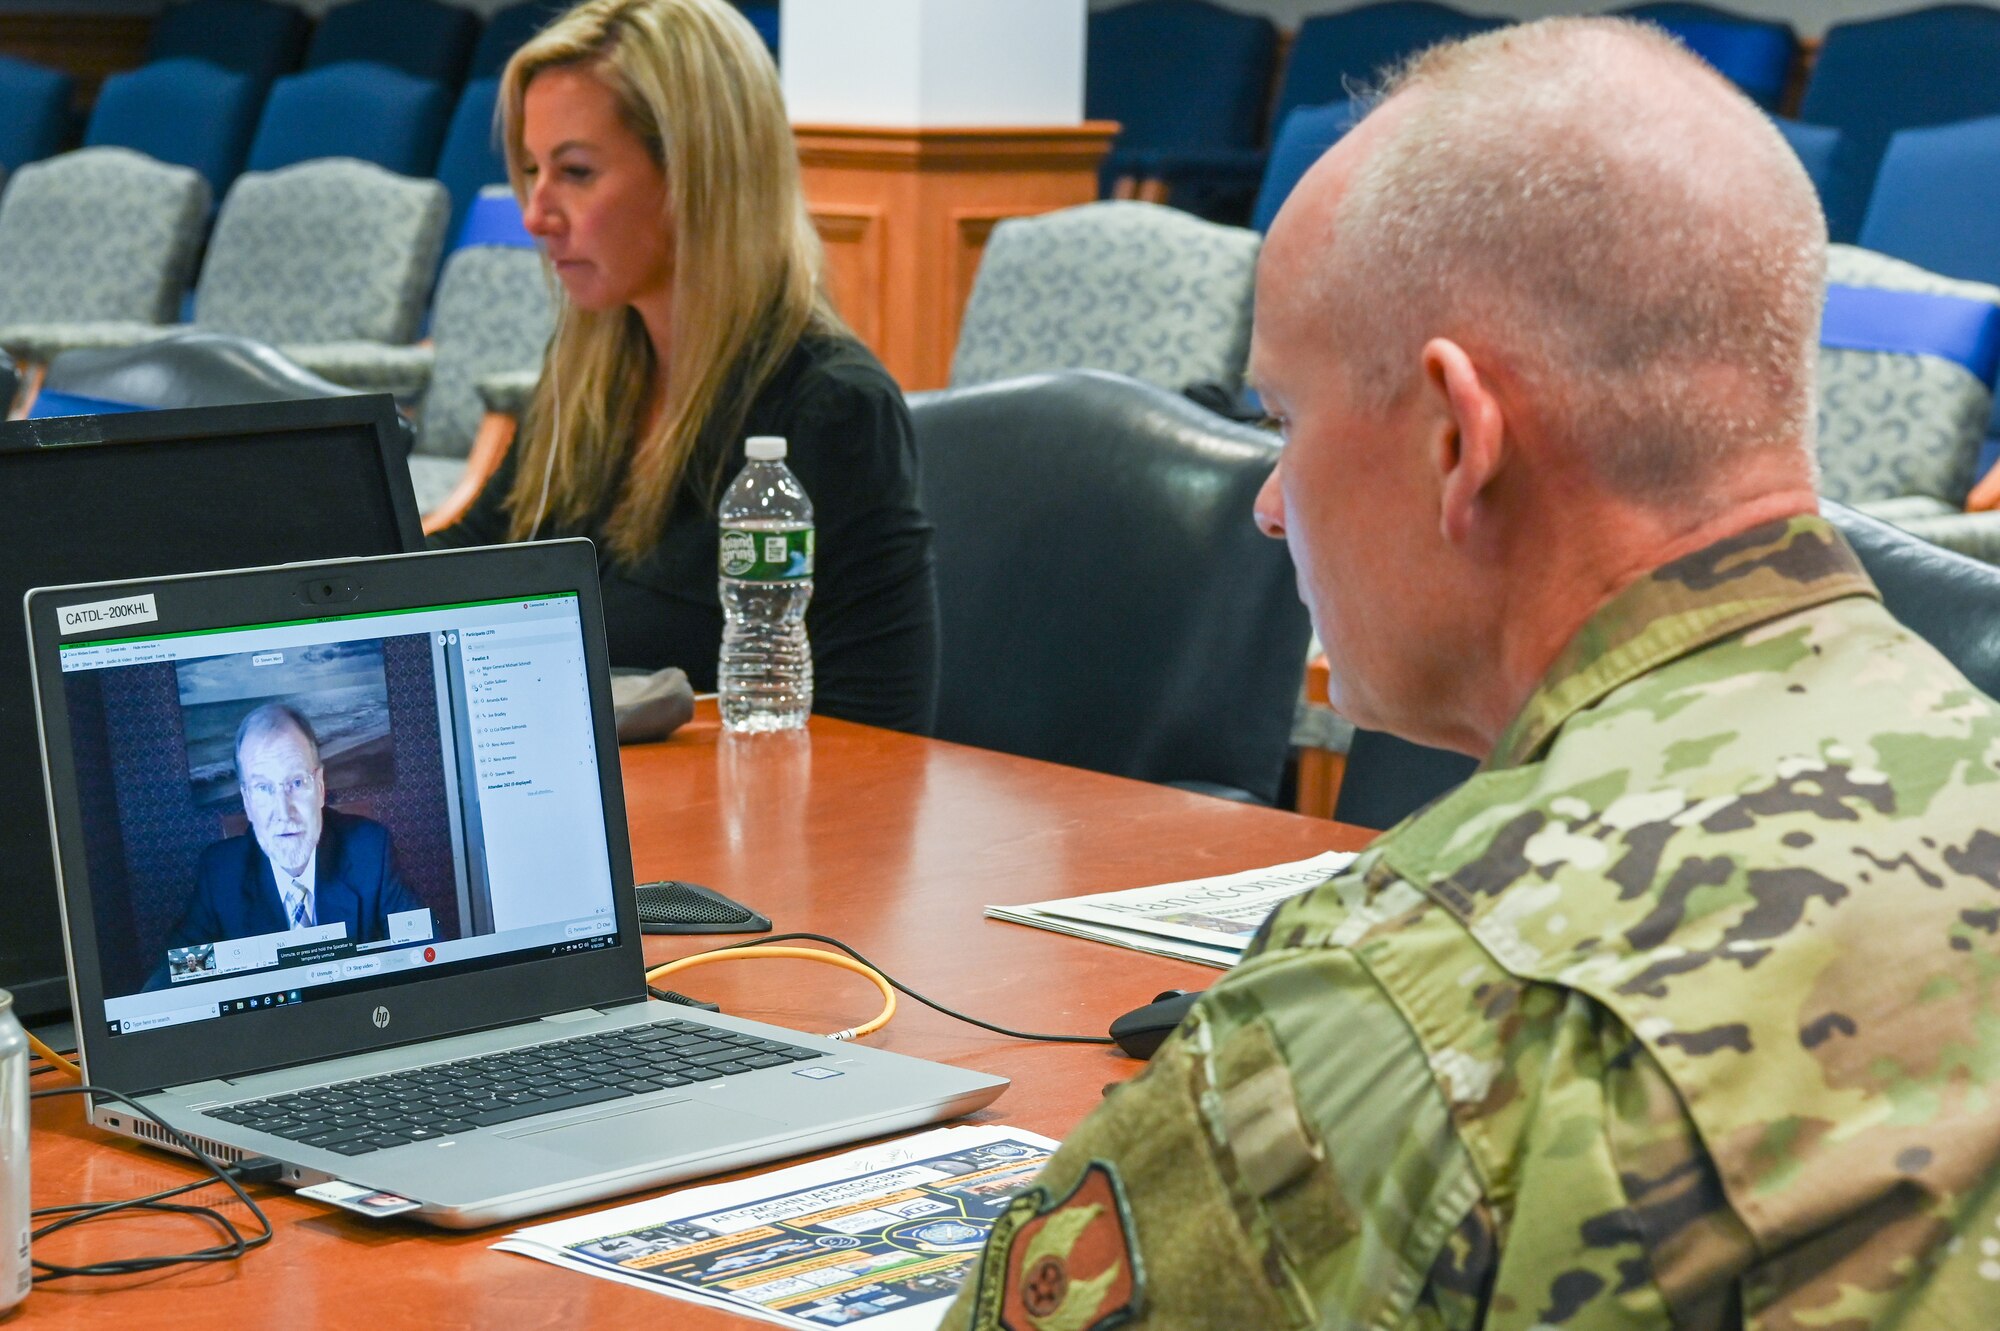 Maj. Gen. Michael Schmidt, right, program executive officer for Command, Control, Communications, Intelligence and Networks, speaks to Steve Wert, PEO for Digital, and other Hanscom Collaboration and Innovation Center symposium participants via Webex, while Caitlin Sullivan, with Gartner Air Force Programs, looks on, Sept. 30.